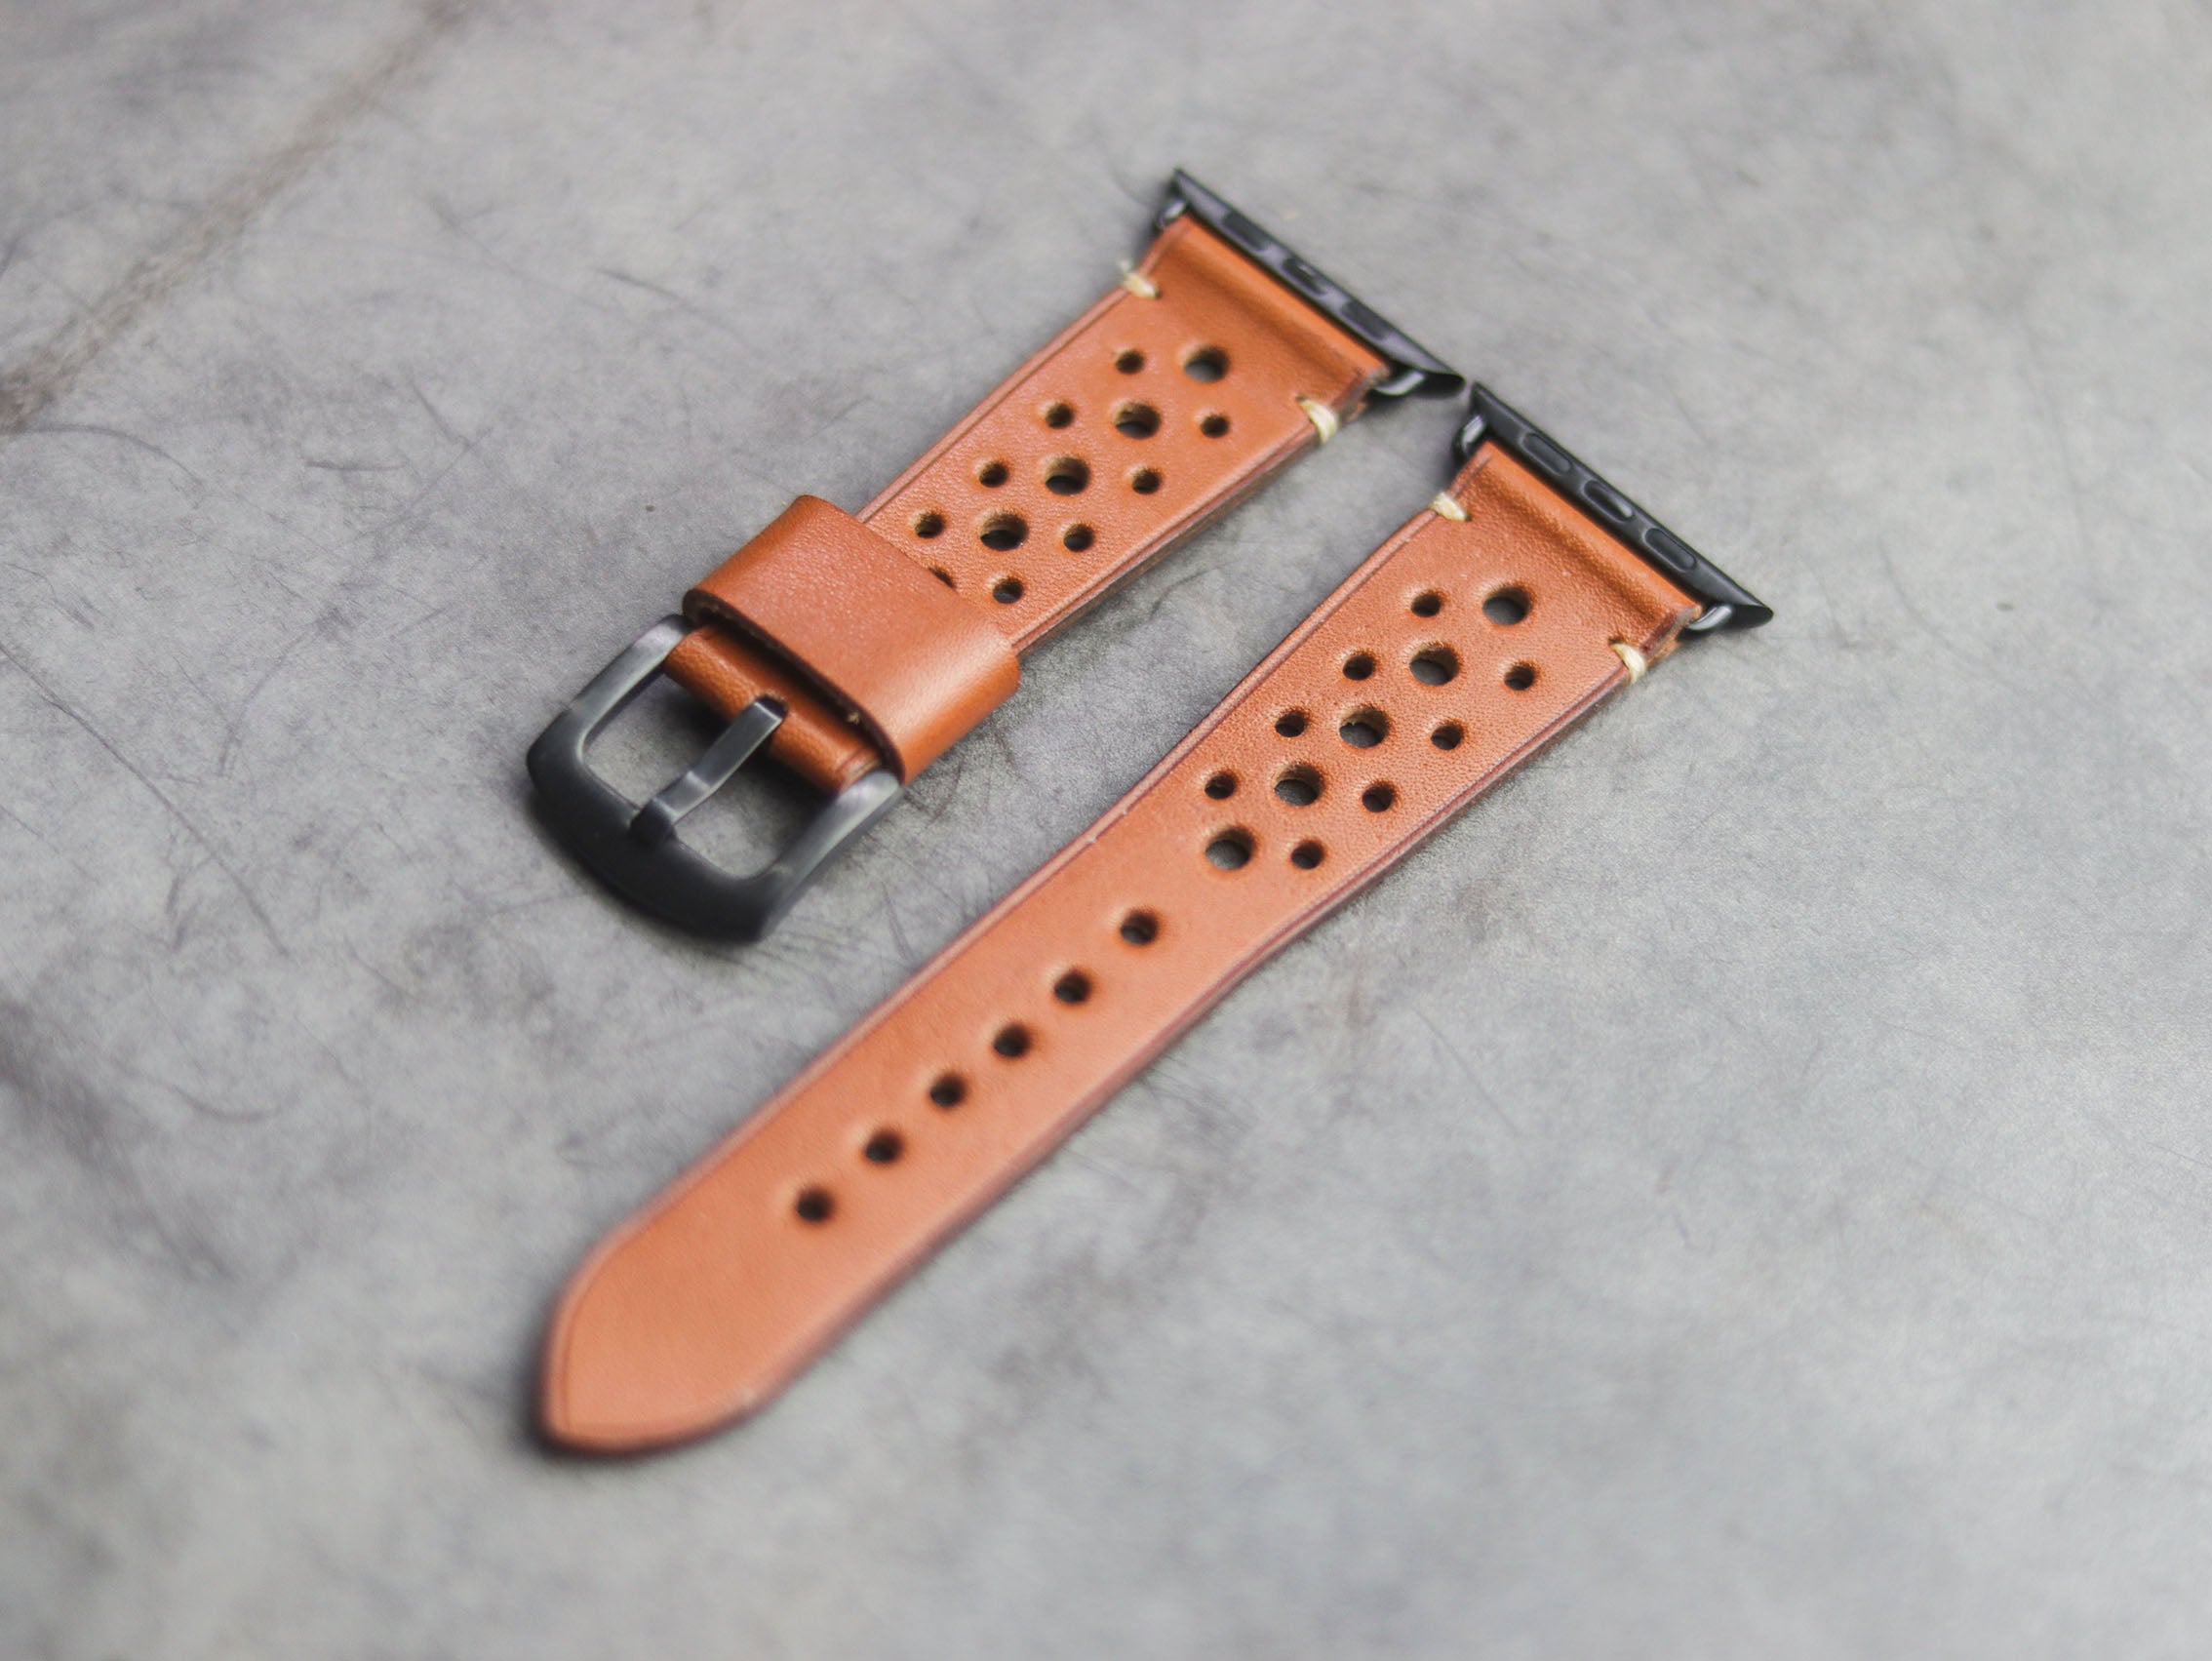 TAN BROWN RALLY HAND-CRAFTED APPLE WATCH STRAPS